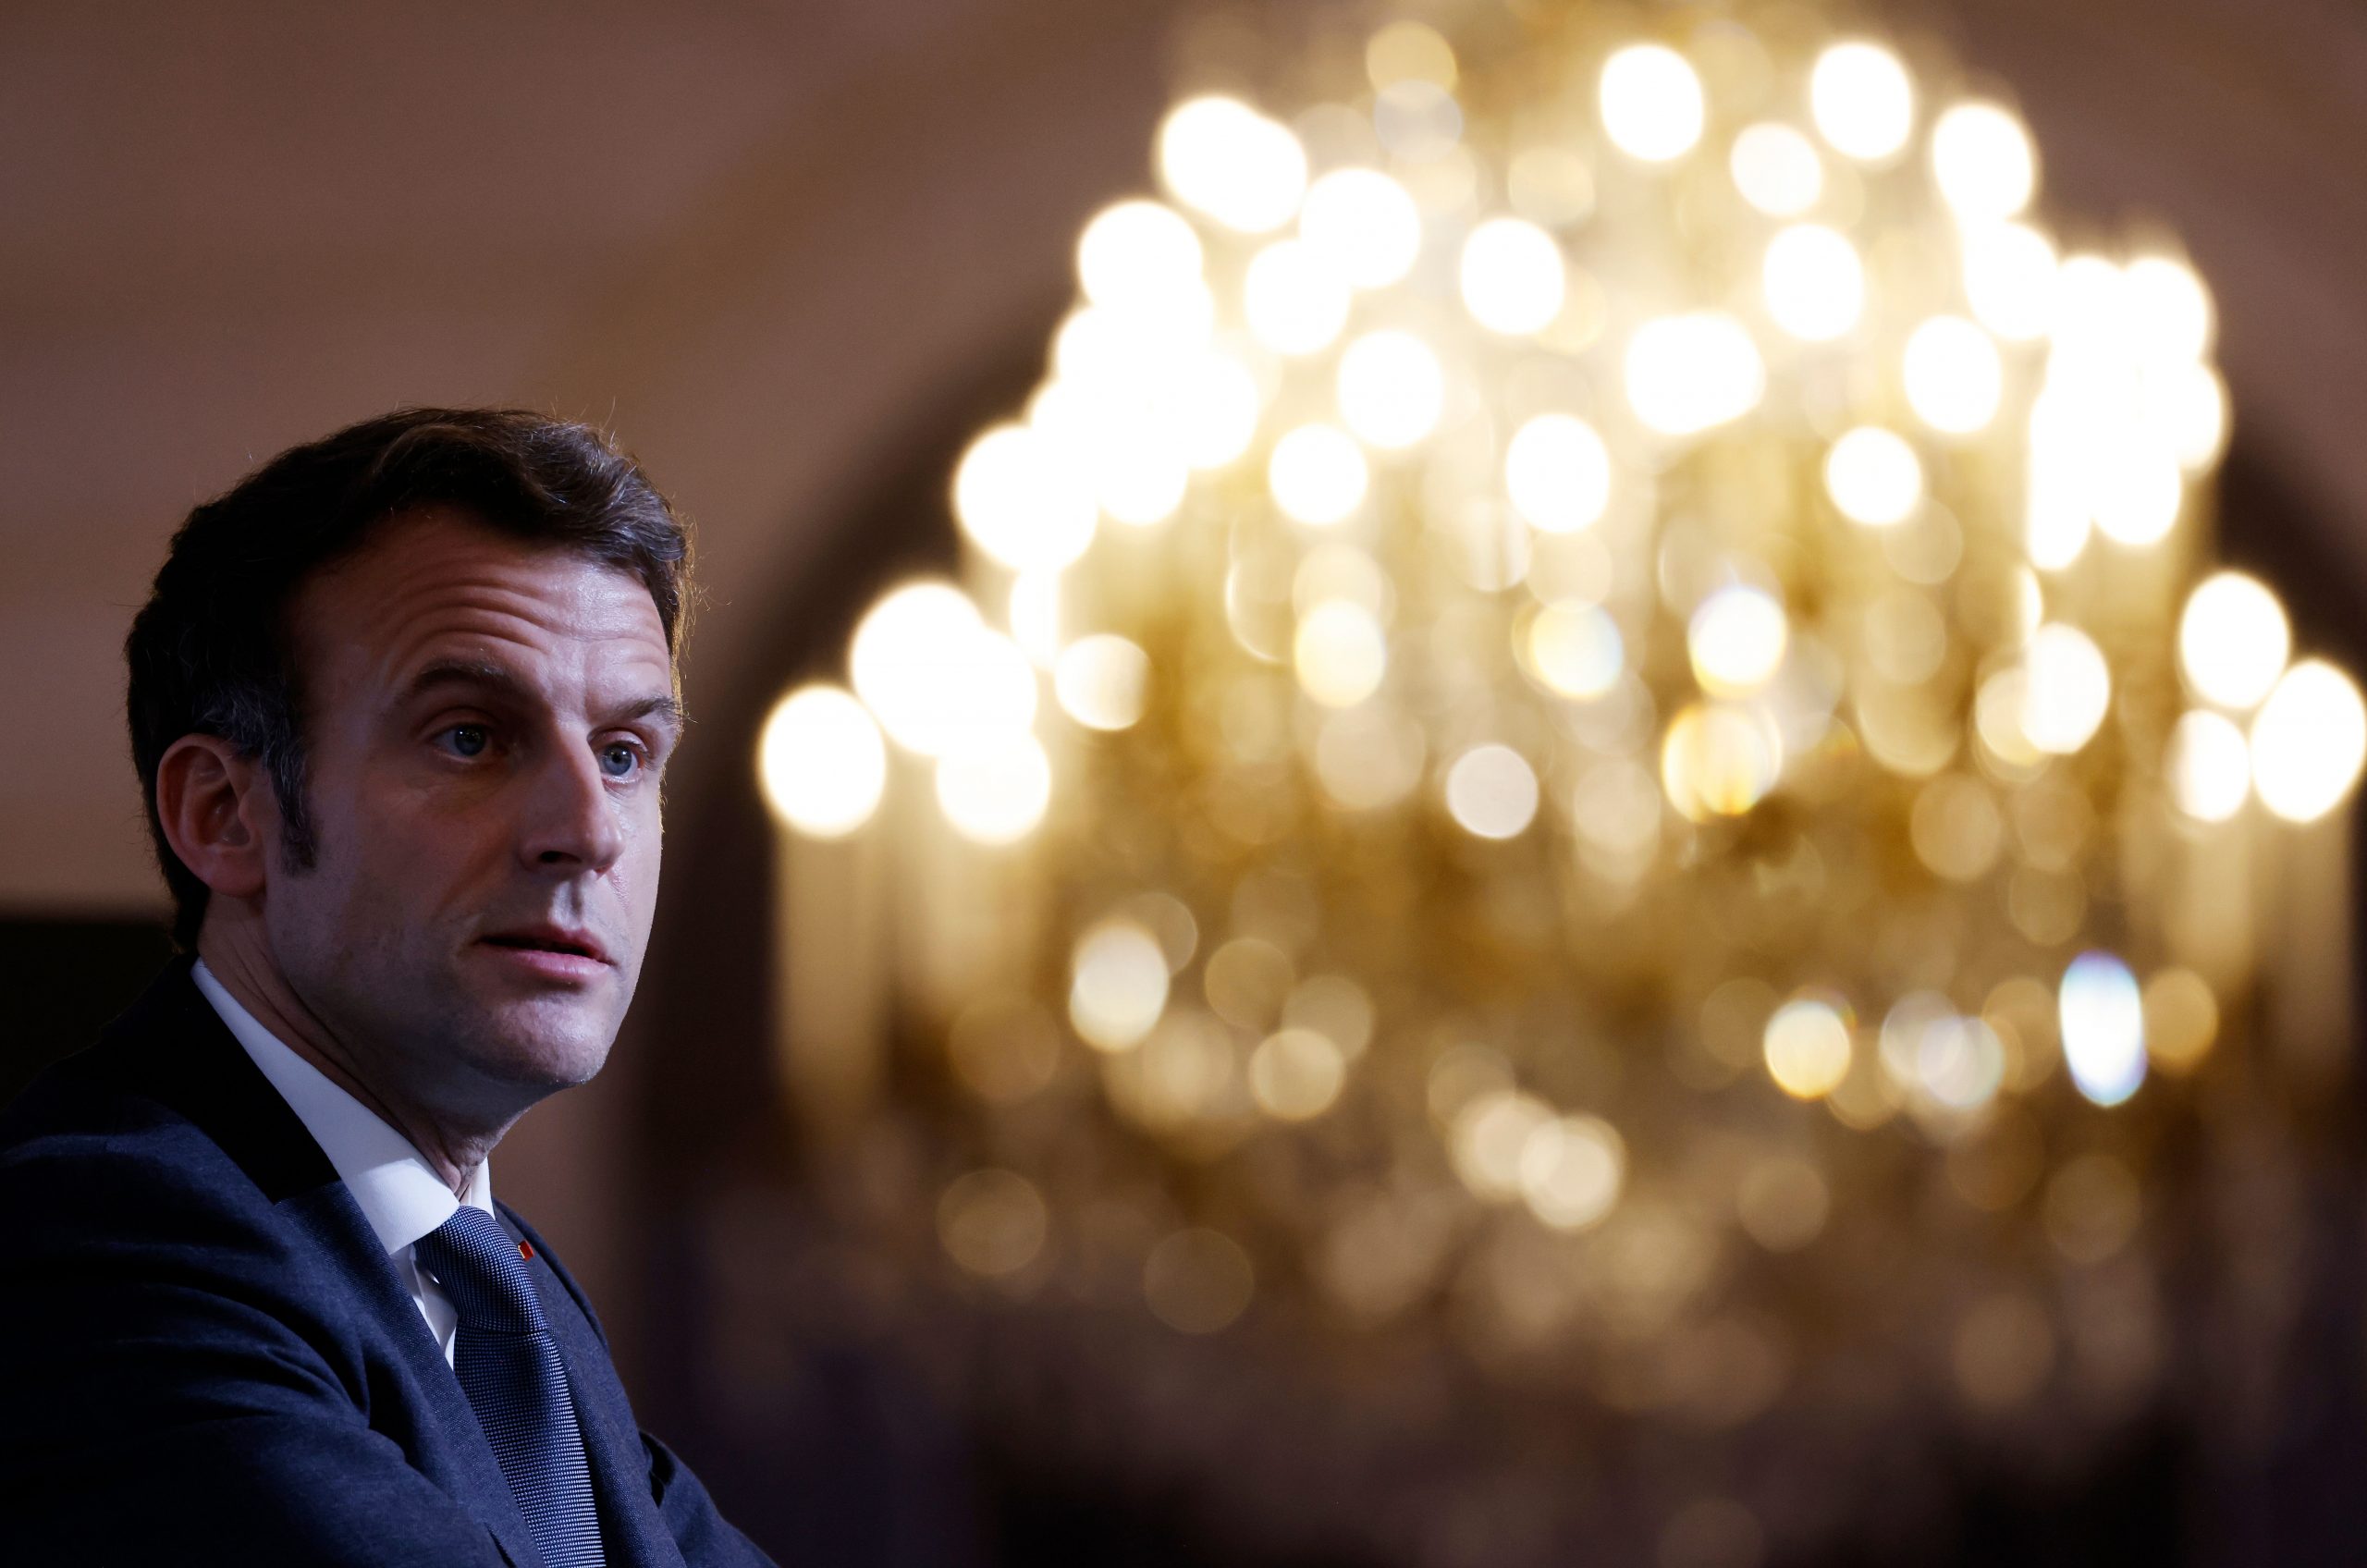 France’s Emmanuel Macron takes own path, seeks dialogue with Russia